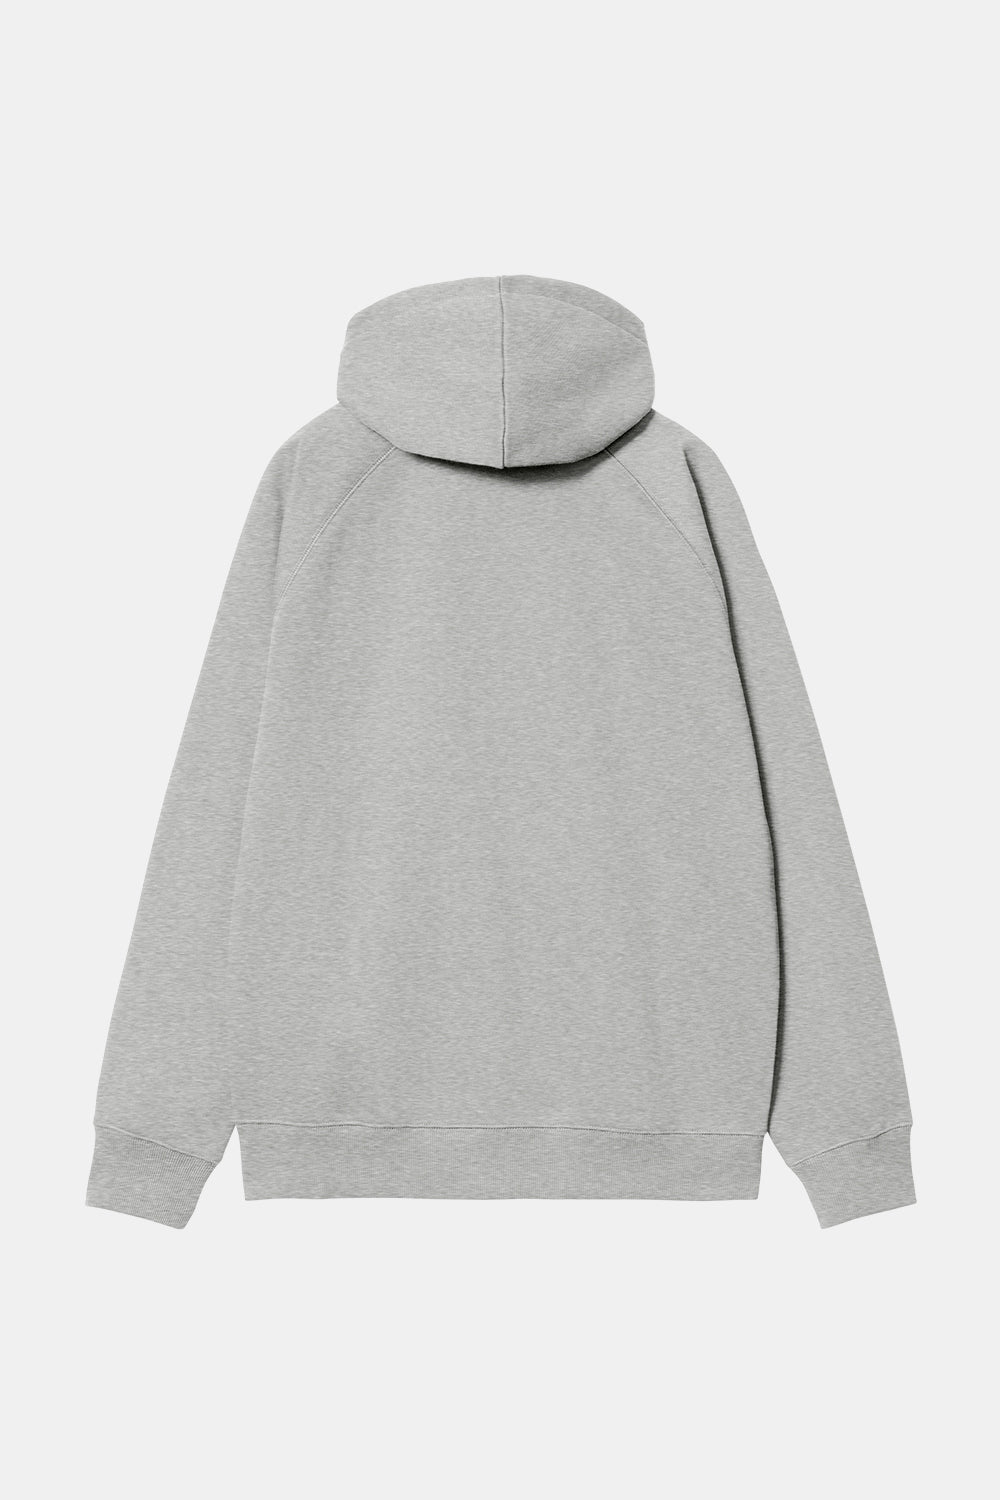 Carhartt WIP Hooded Chase Jacket (Grey Heather/Gold)